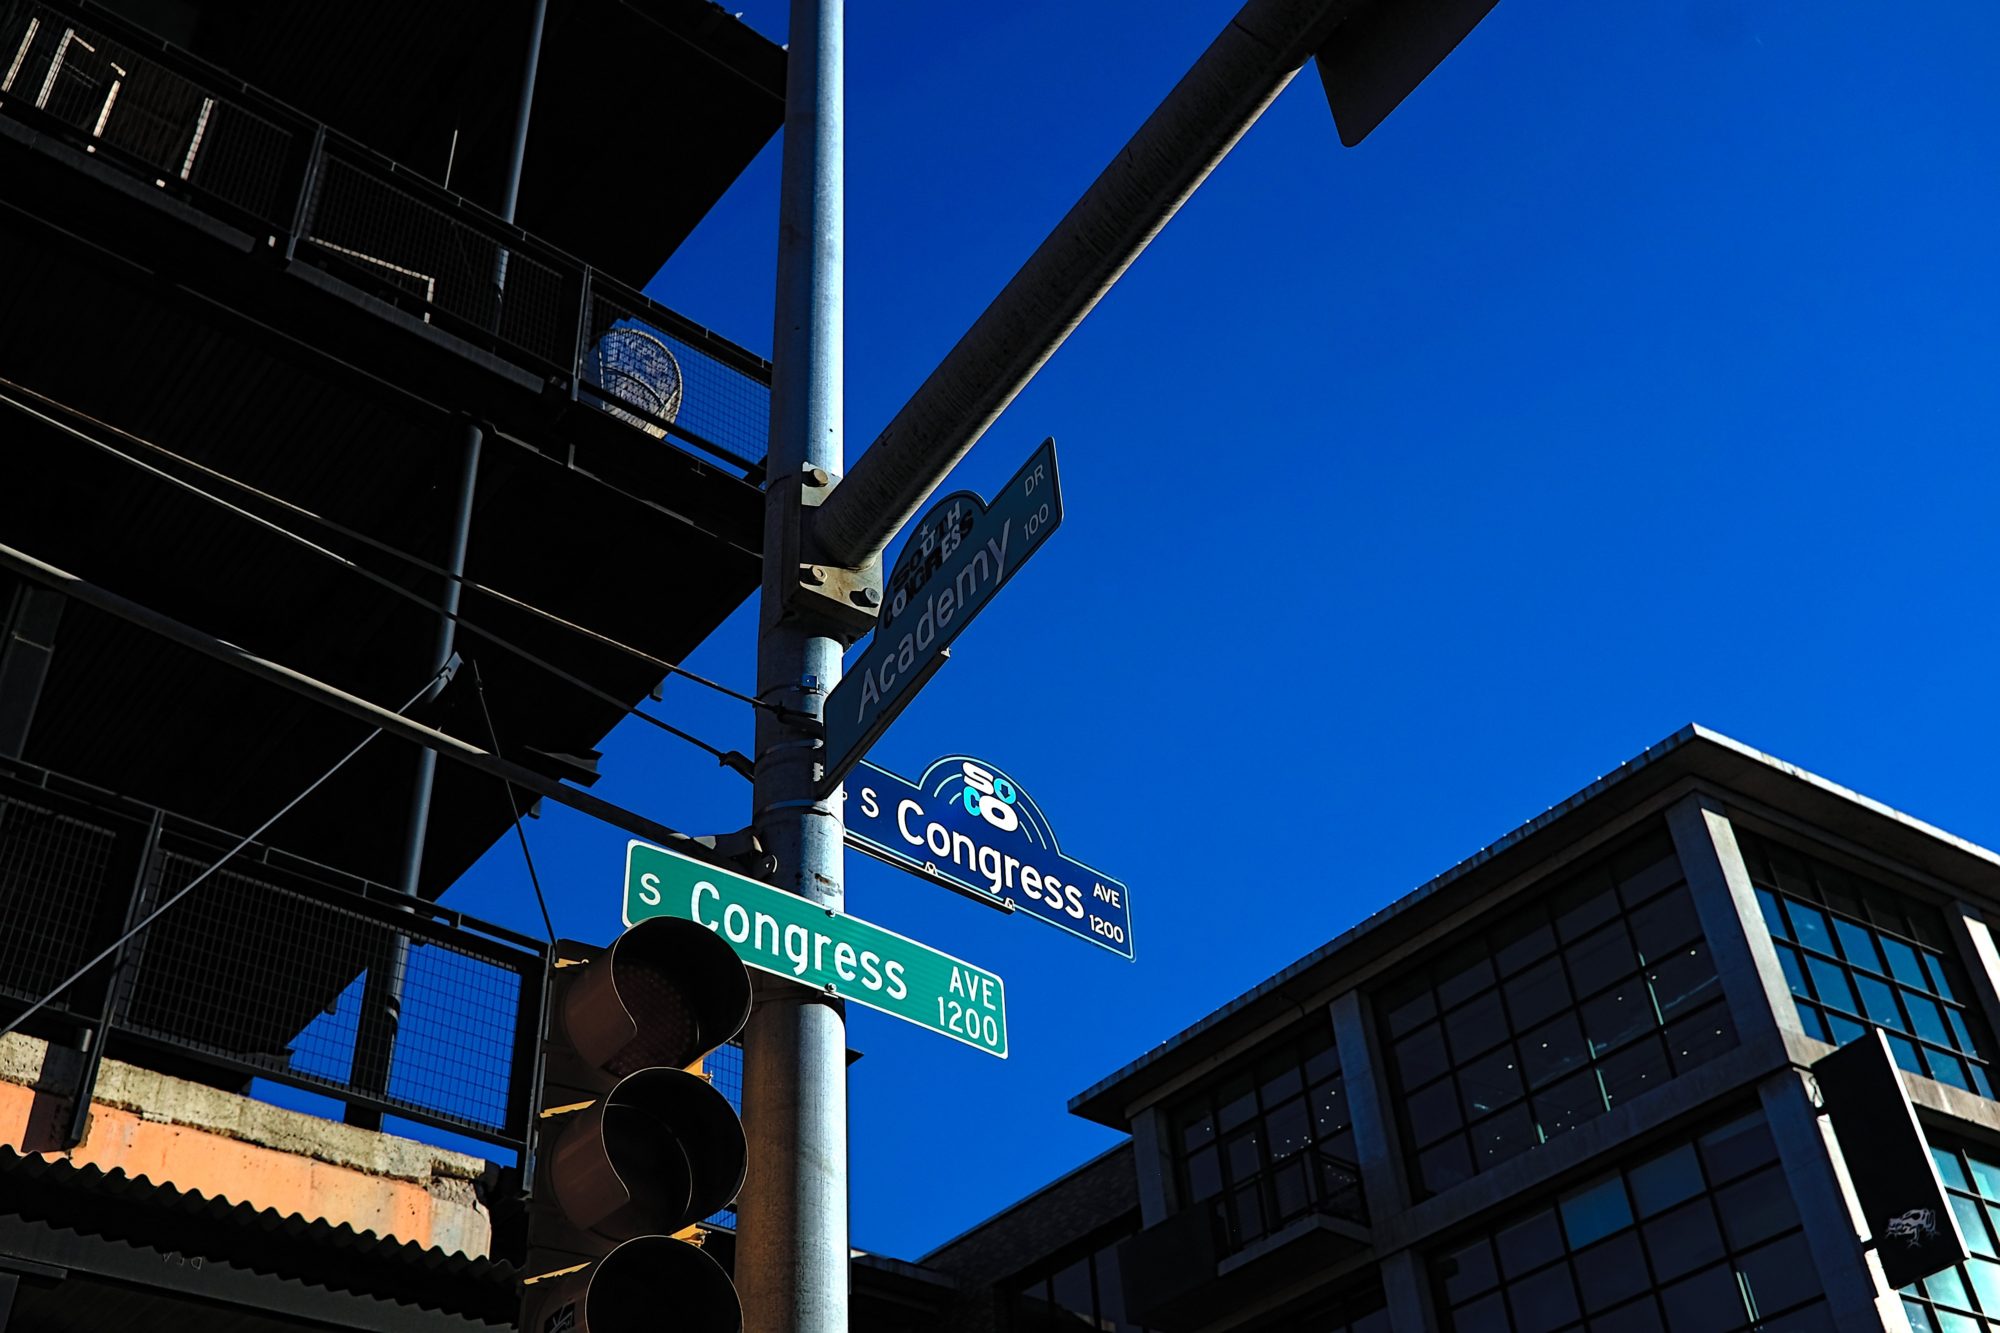 South Congress Street Sign in Austin